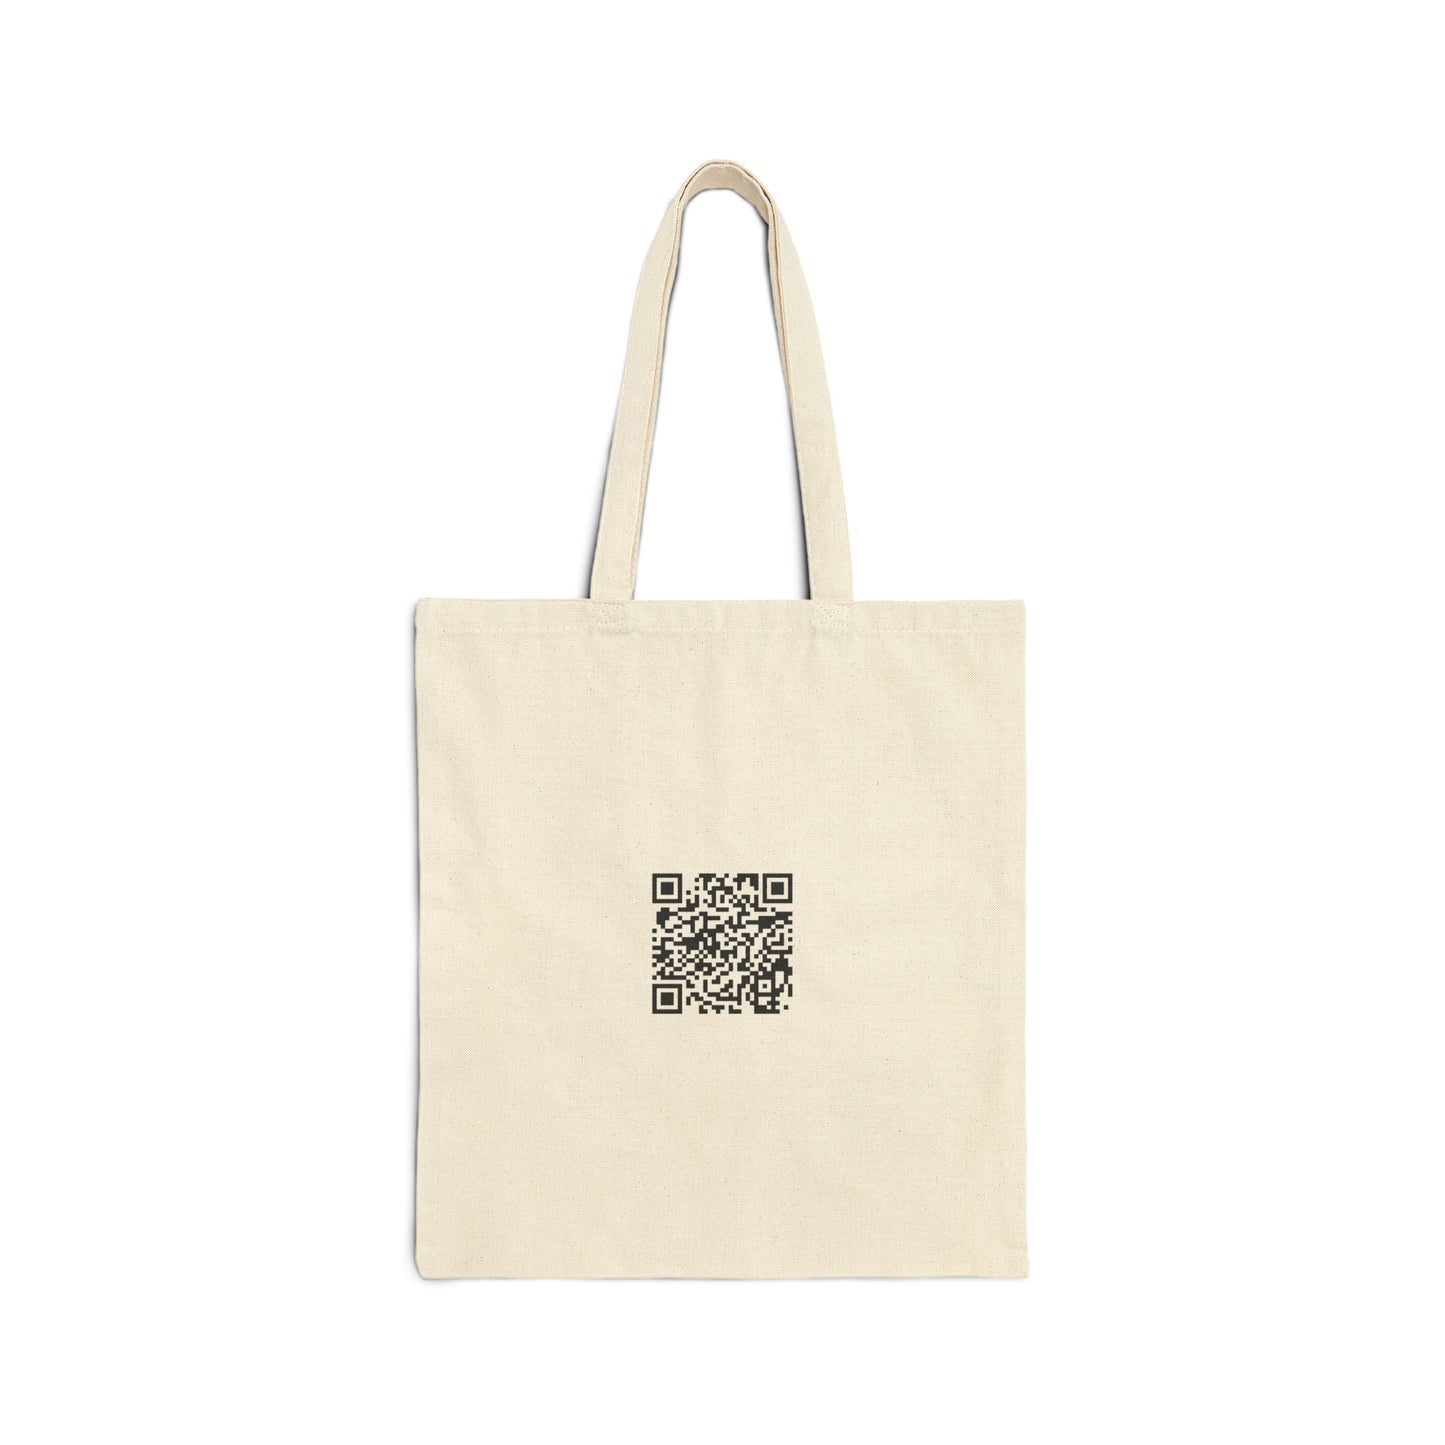 Heroine Of Her Own Life - Cotton Canvas Tote Bag